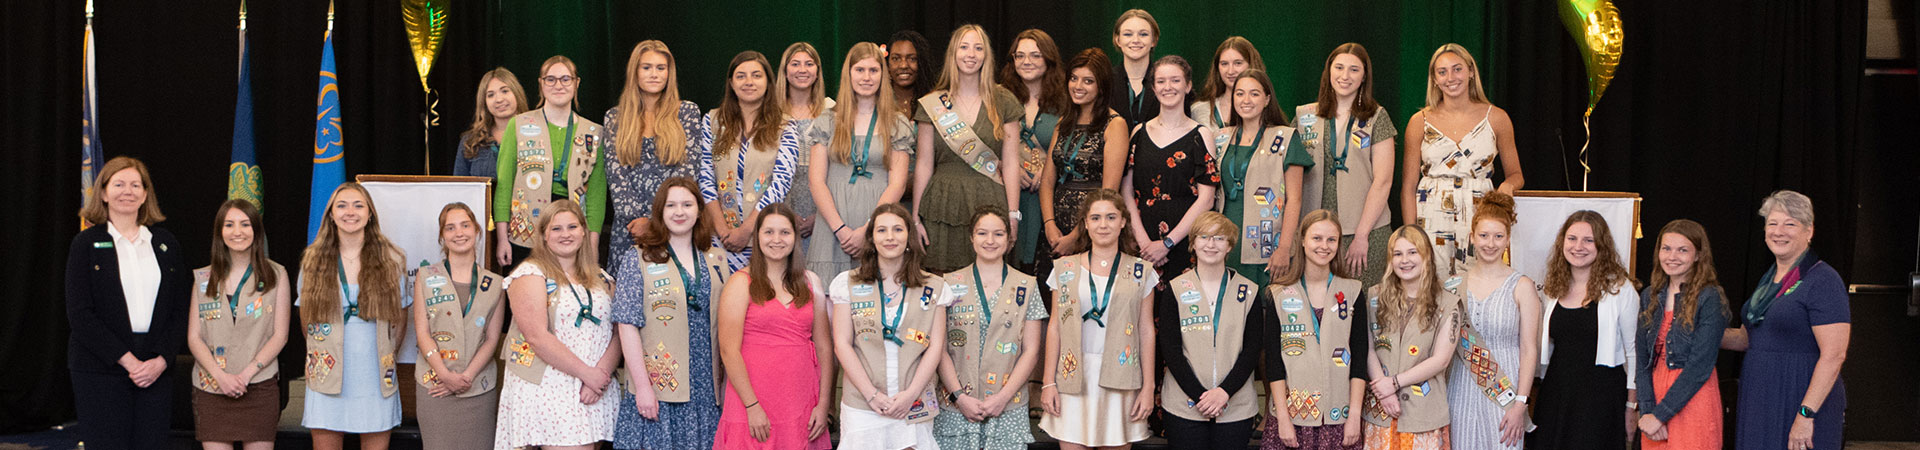  A group of Girl Scouts standing on a stage and smiling for the camera 